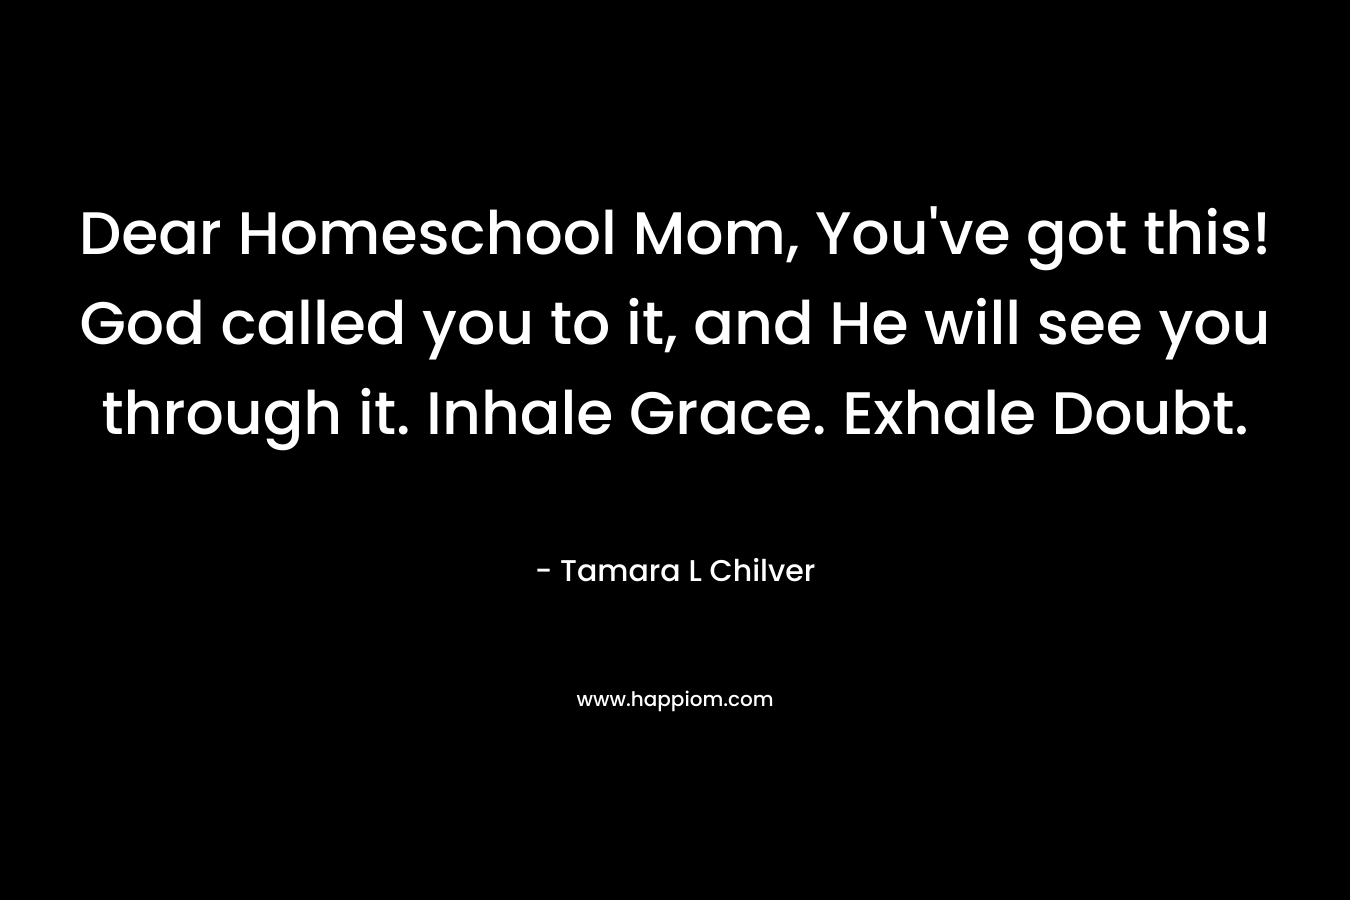 Dear Homeschool Mom, You’ve got this! God called you to it, and He will see you through it. Inhale Grace. Exhale Doubt. – Tamara L Chilver